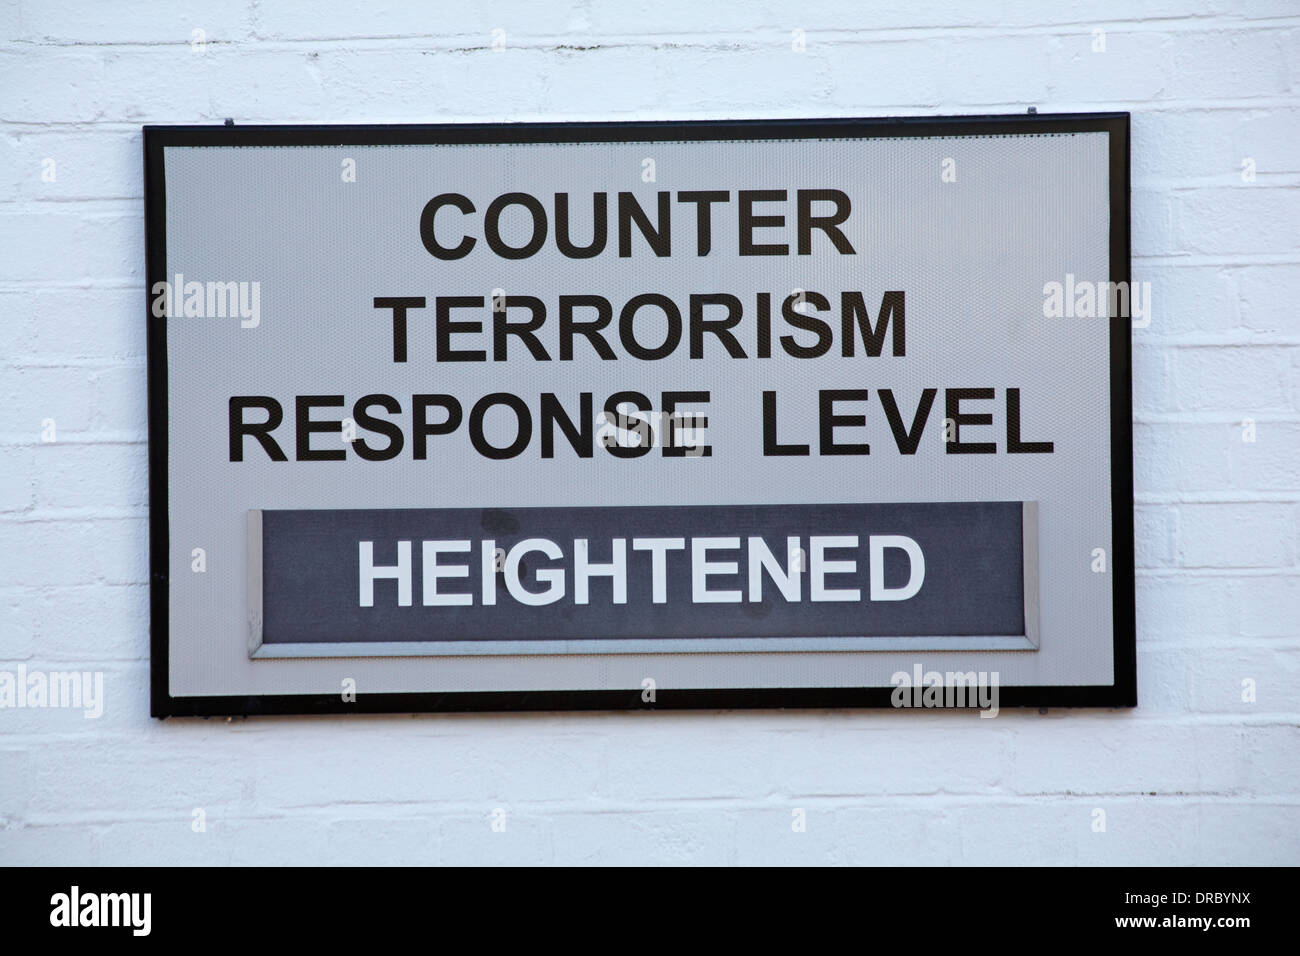 counter terrorism response level heightened sign on building wall at Portsmouth Historic Dockyard in January Stock Photo